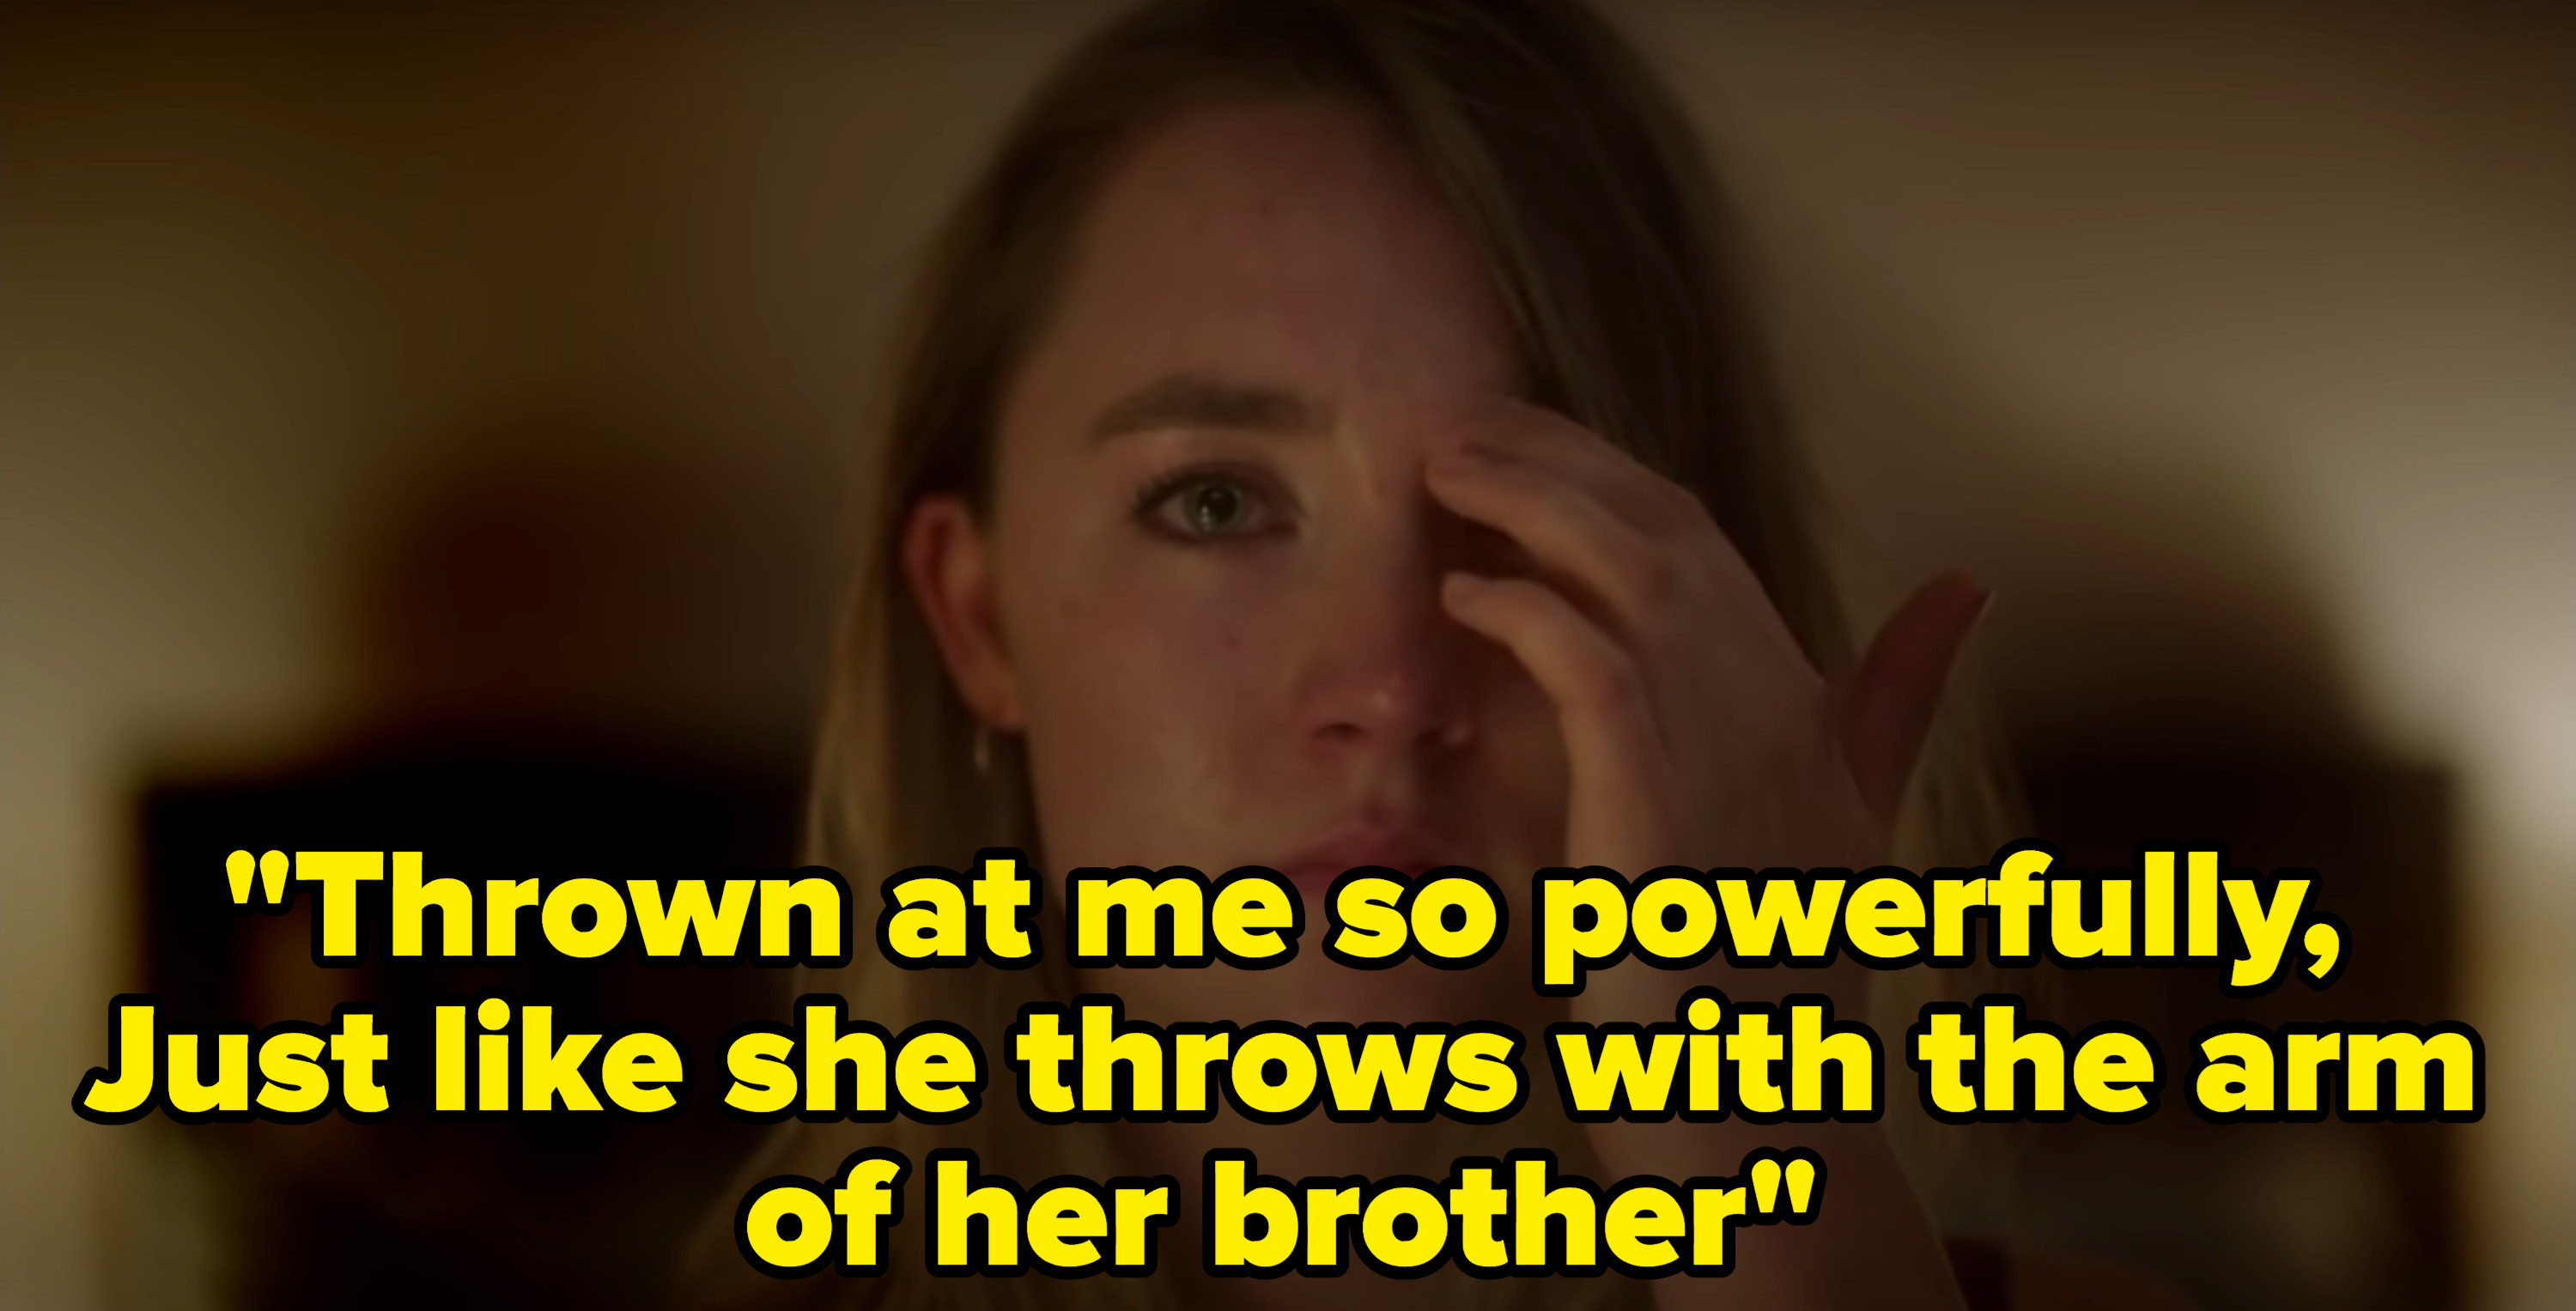 Still from the music video with the lyric: &quot;Thrown at me so powerfully, Just like she throws with the arm of her brother&quot;